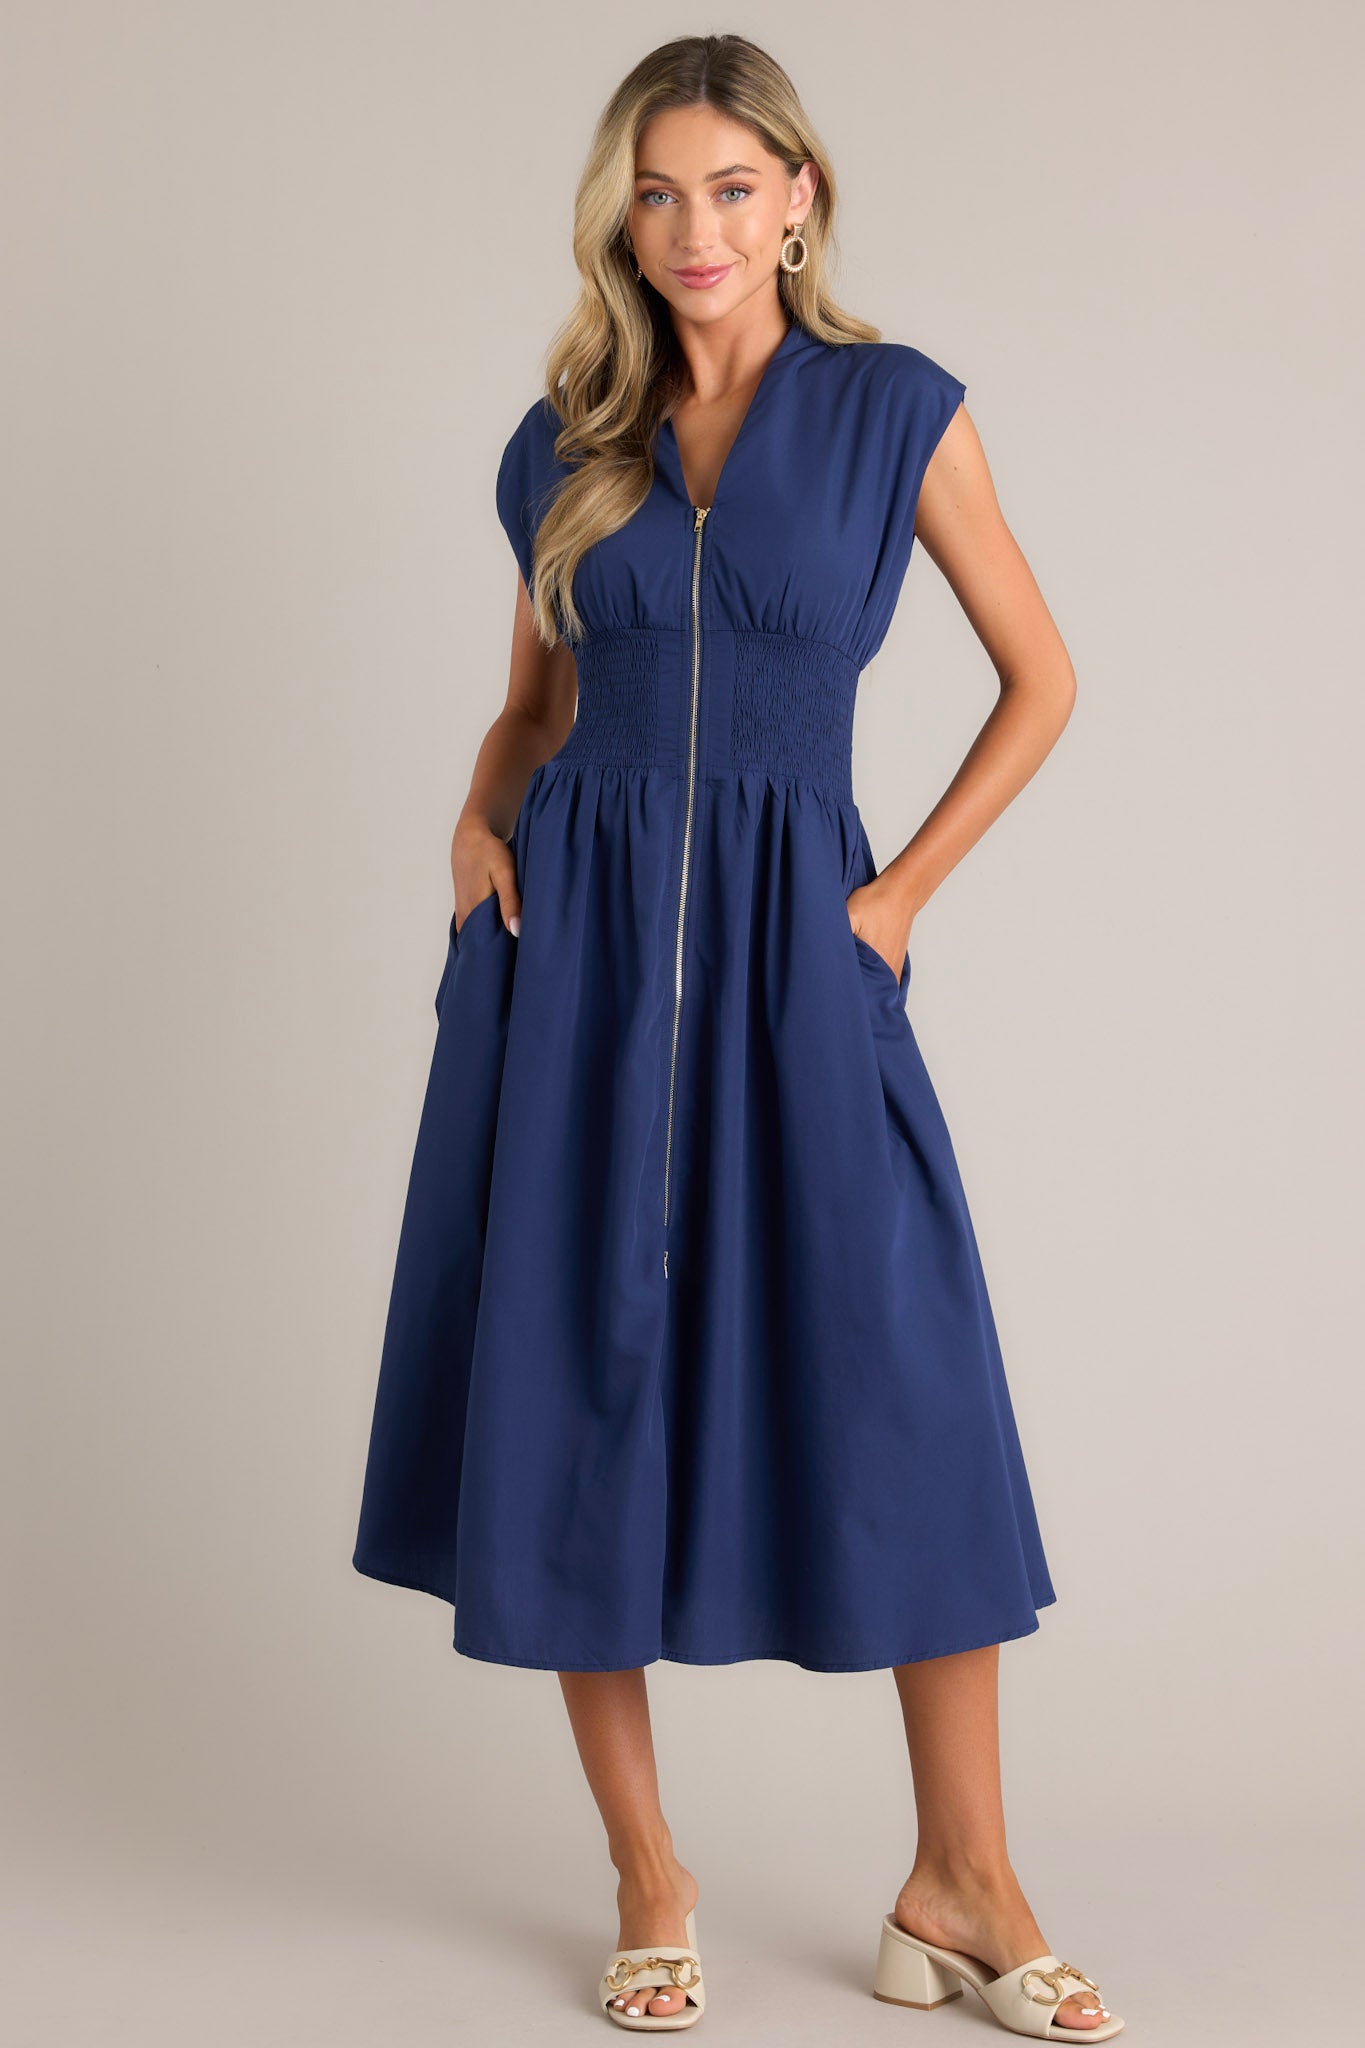 Front view of a navy blue dress with a V-neckline, cap sleeves, a zippered front, and a cinched waist with shirred detailing, featuring a flowing midi-length skirt, highlighting its elegant and stylish design.